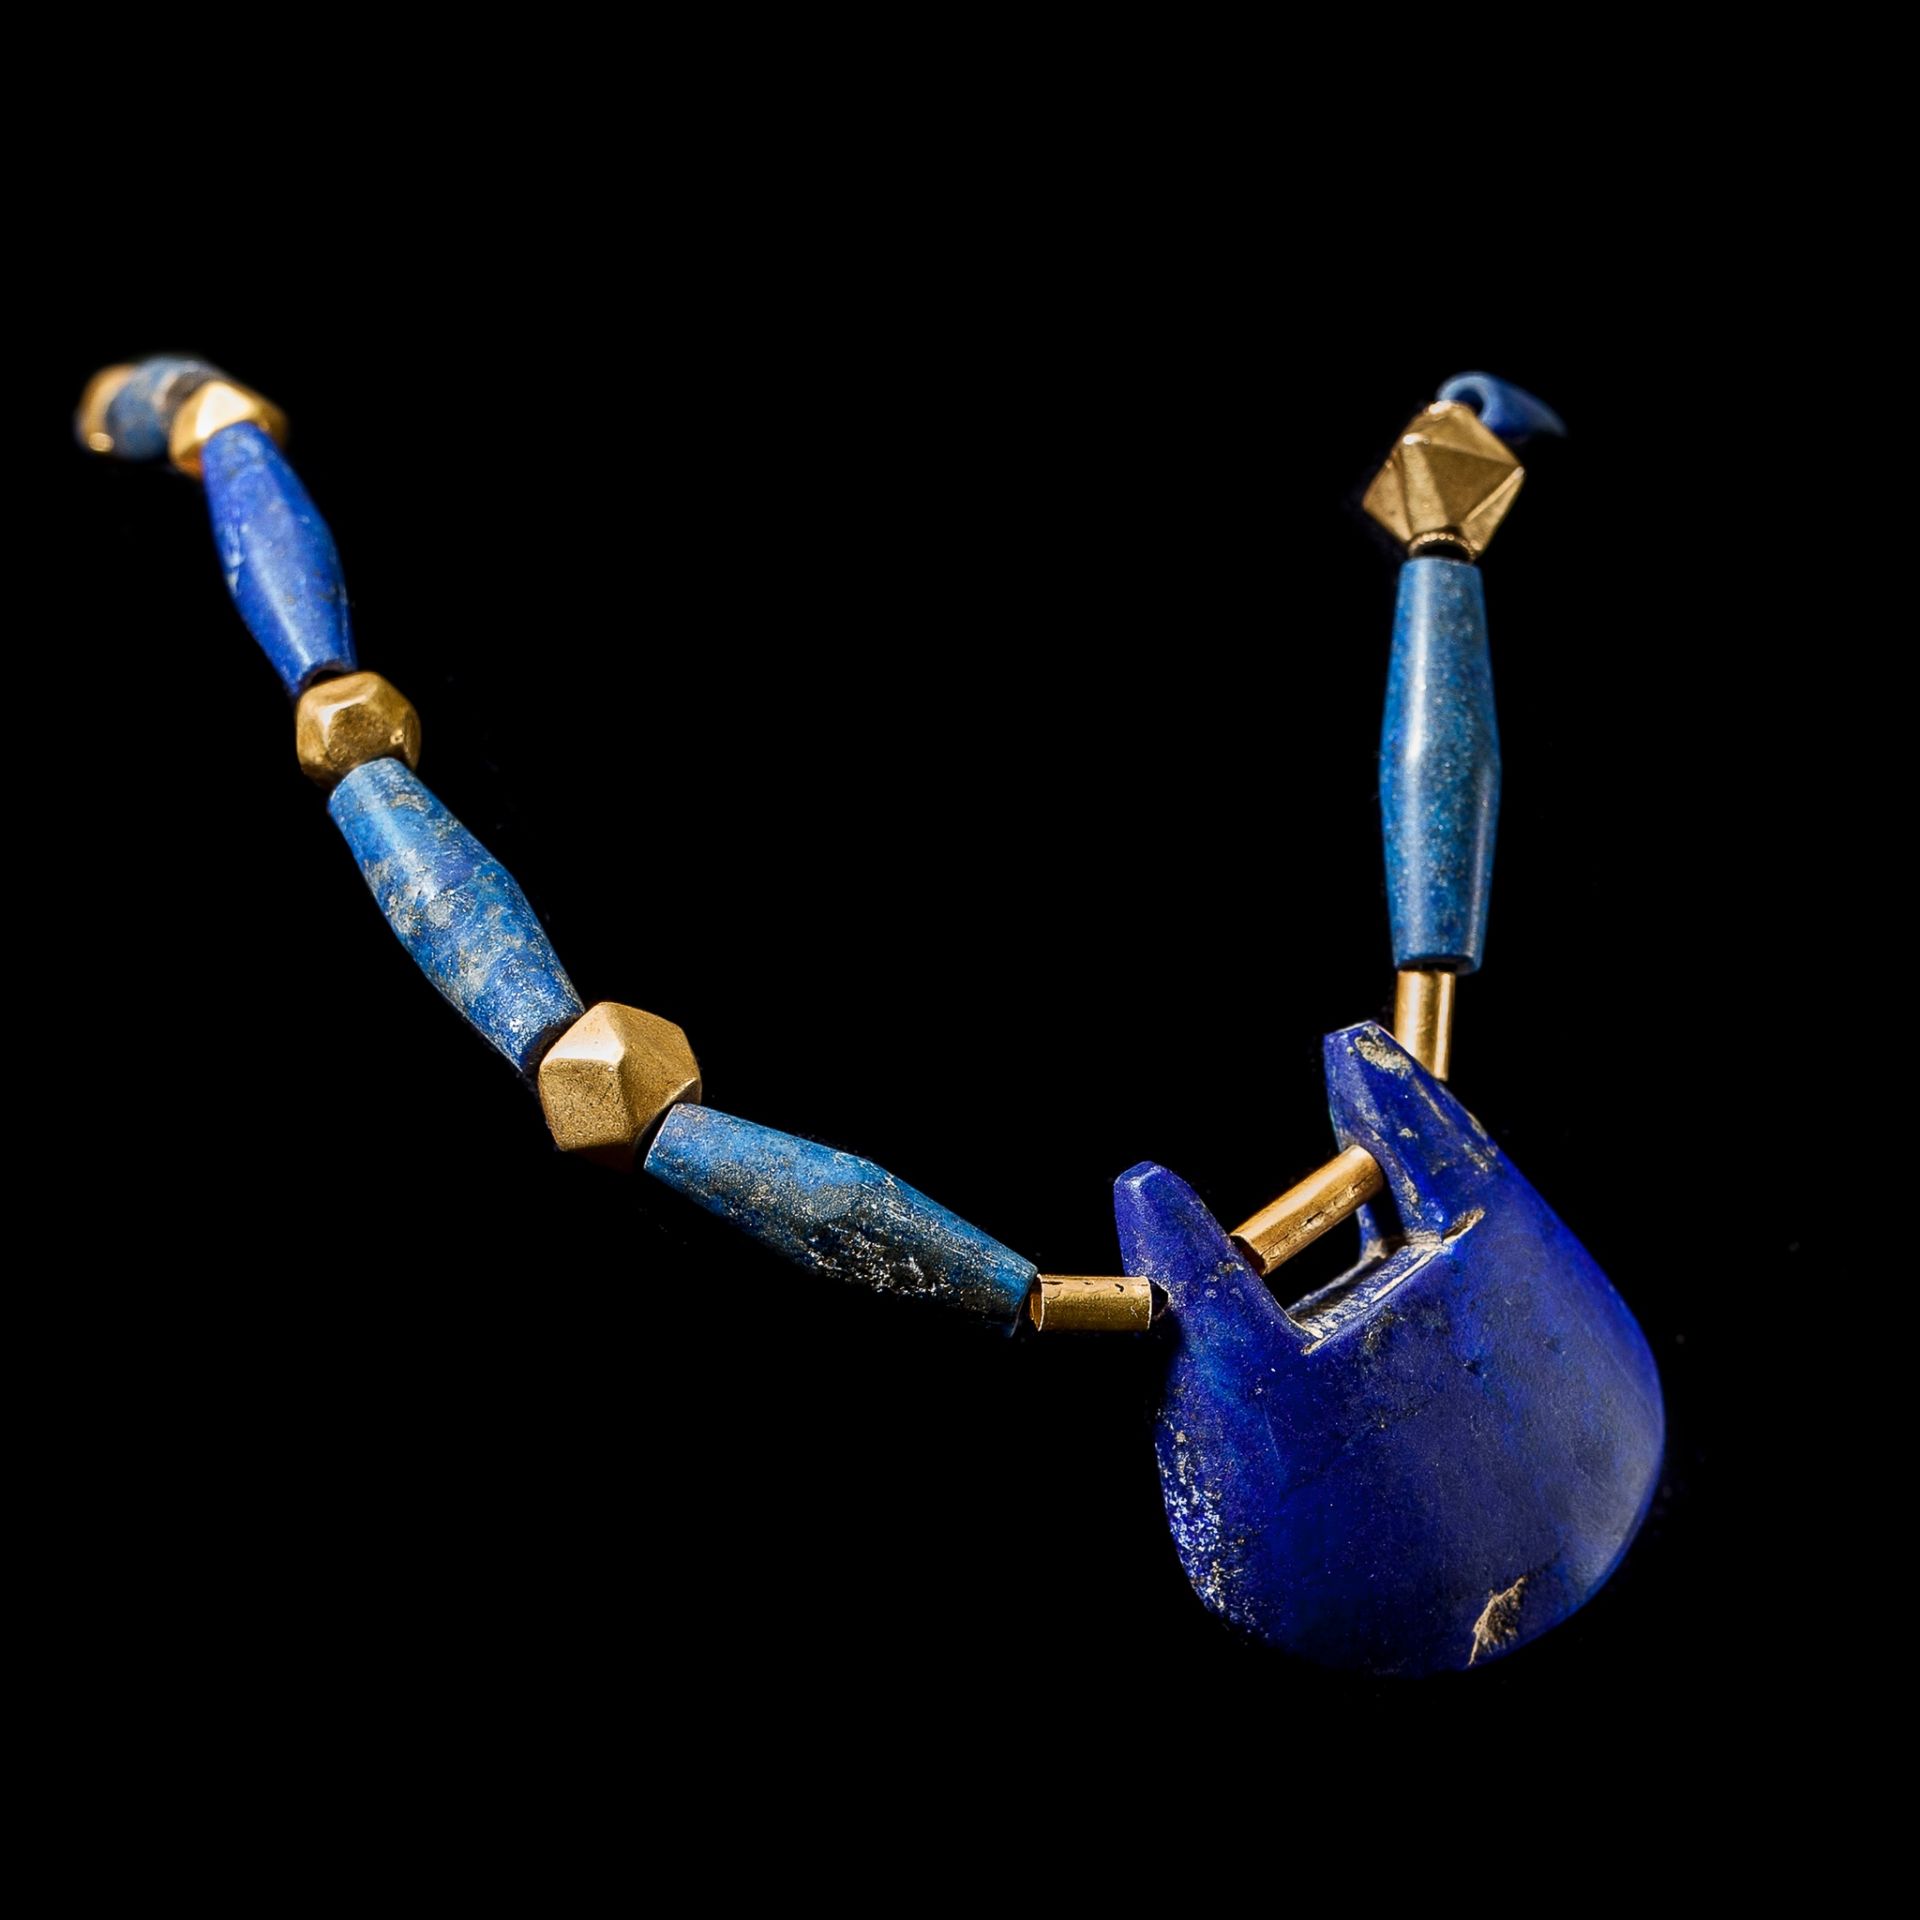 WESTERN ASIATIC LAPIS AND GOLD PENDANT NECKLACE NEAR EAST, 1ST MILLENNIUM B.C. - Image 2 of 2